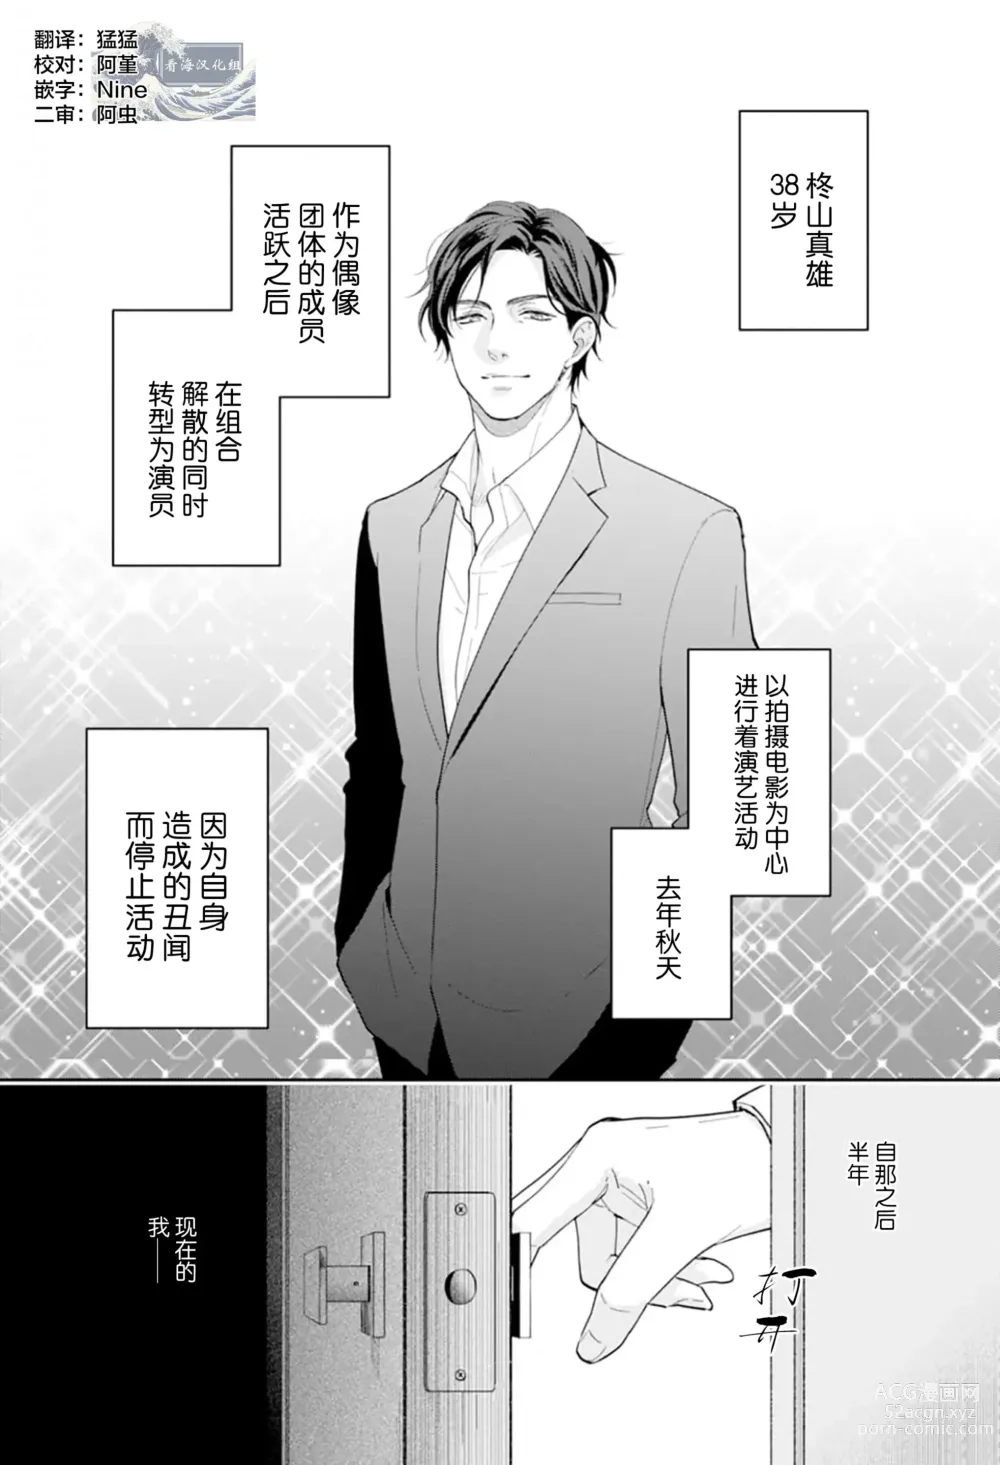 Page 6 of manga Toshiue no hitoーsecond bloomー｜年上之人—second bloom—Chinese]